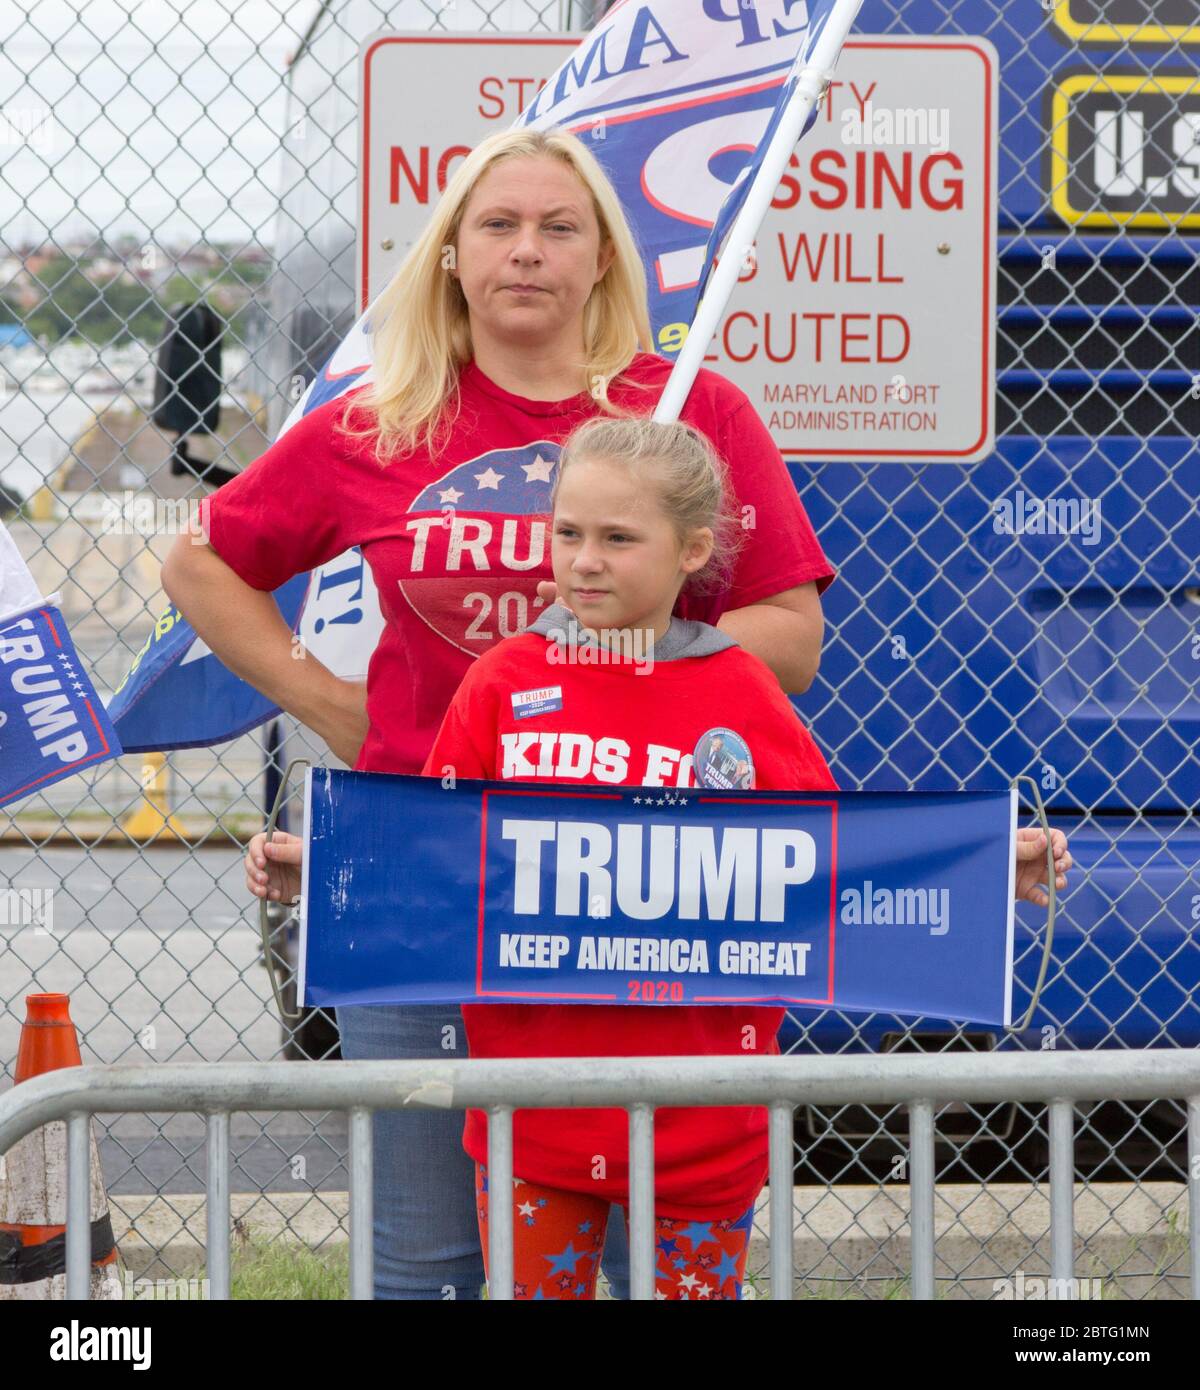 Baltimore, Maryland, USA. 25th May, 2020. Woman and young girl stand with pro-Trump clothing and signs behind barricade outside historic Fort McHenry in Baltimore, Maryland, where President Donald Trump and First Lady Melania Trump visit on Memorial Day 2020 despite urging from Baltimore Mayor Bernard C. “Jack” Young to cancel to avoid setting a bad example while the city remains under a stay-at-home order (with exemptions including some outdoor exercise), and to avoid being an expensive drain on public safety resources. Girl wears t-shirt reading 'Kids For Trump'. Kay Howell/Alamy Live News Stock Photo